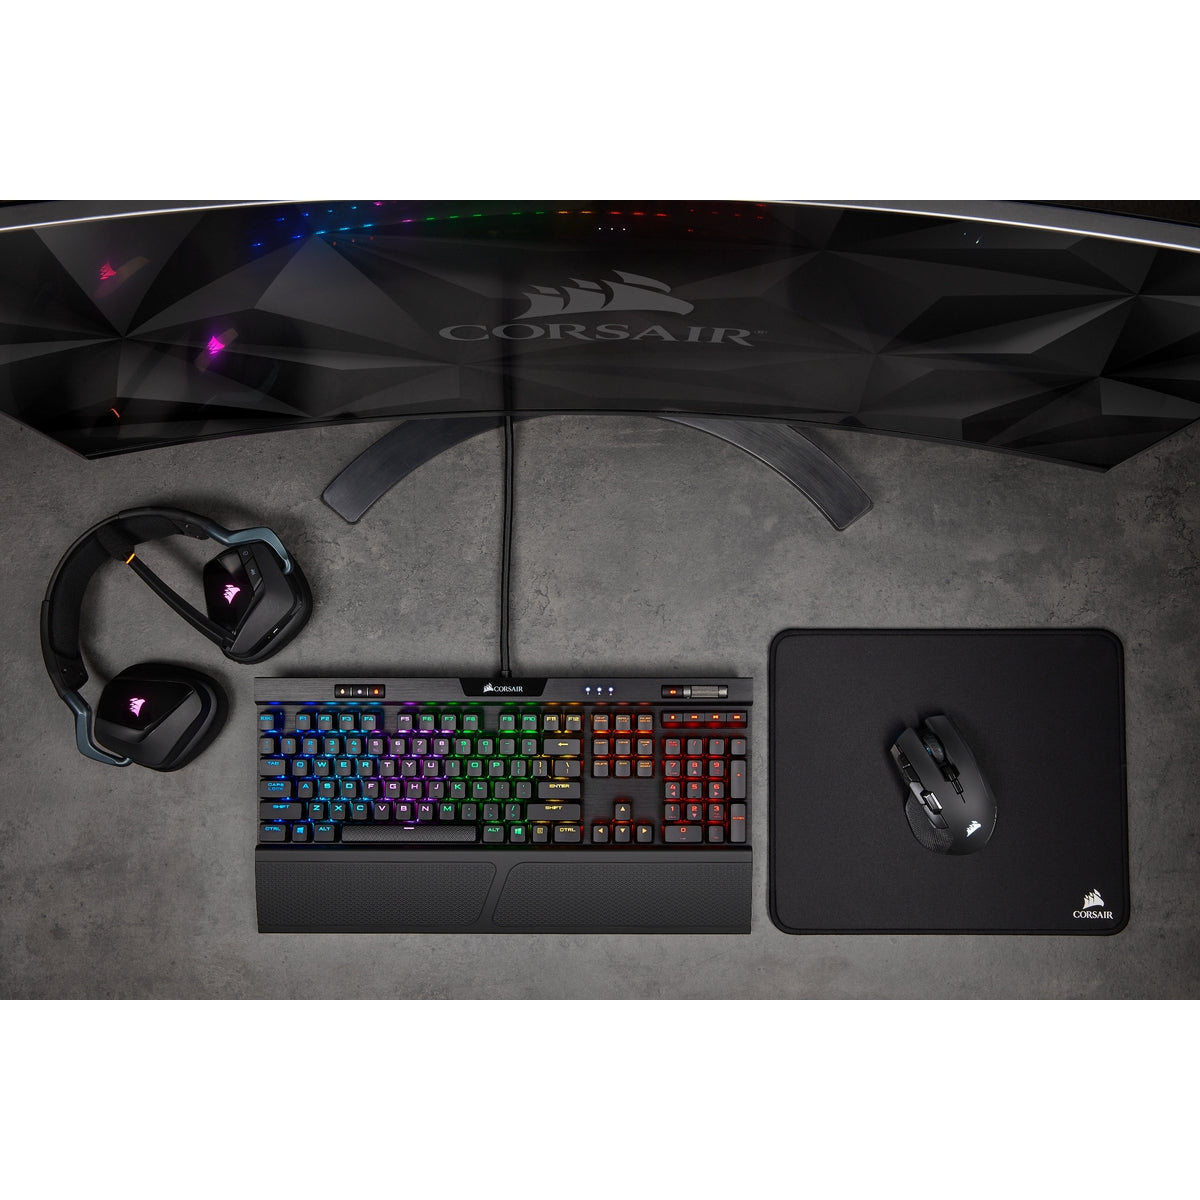 Mouse Corsair Gaming Ironclaw Rgb Wireless 18K Dpi Ch-9317011-Na